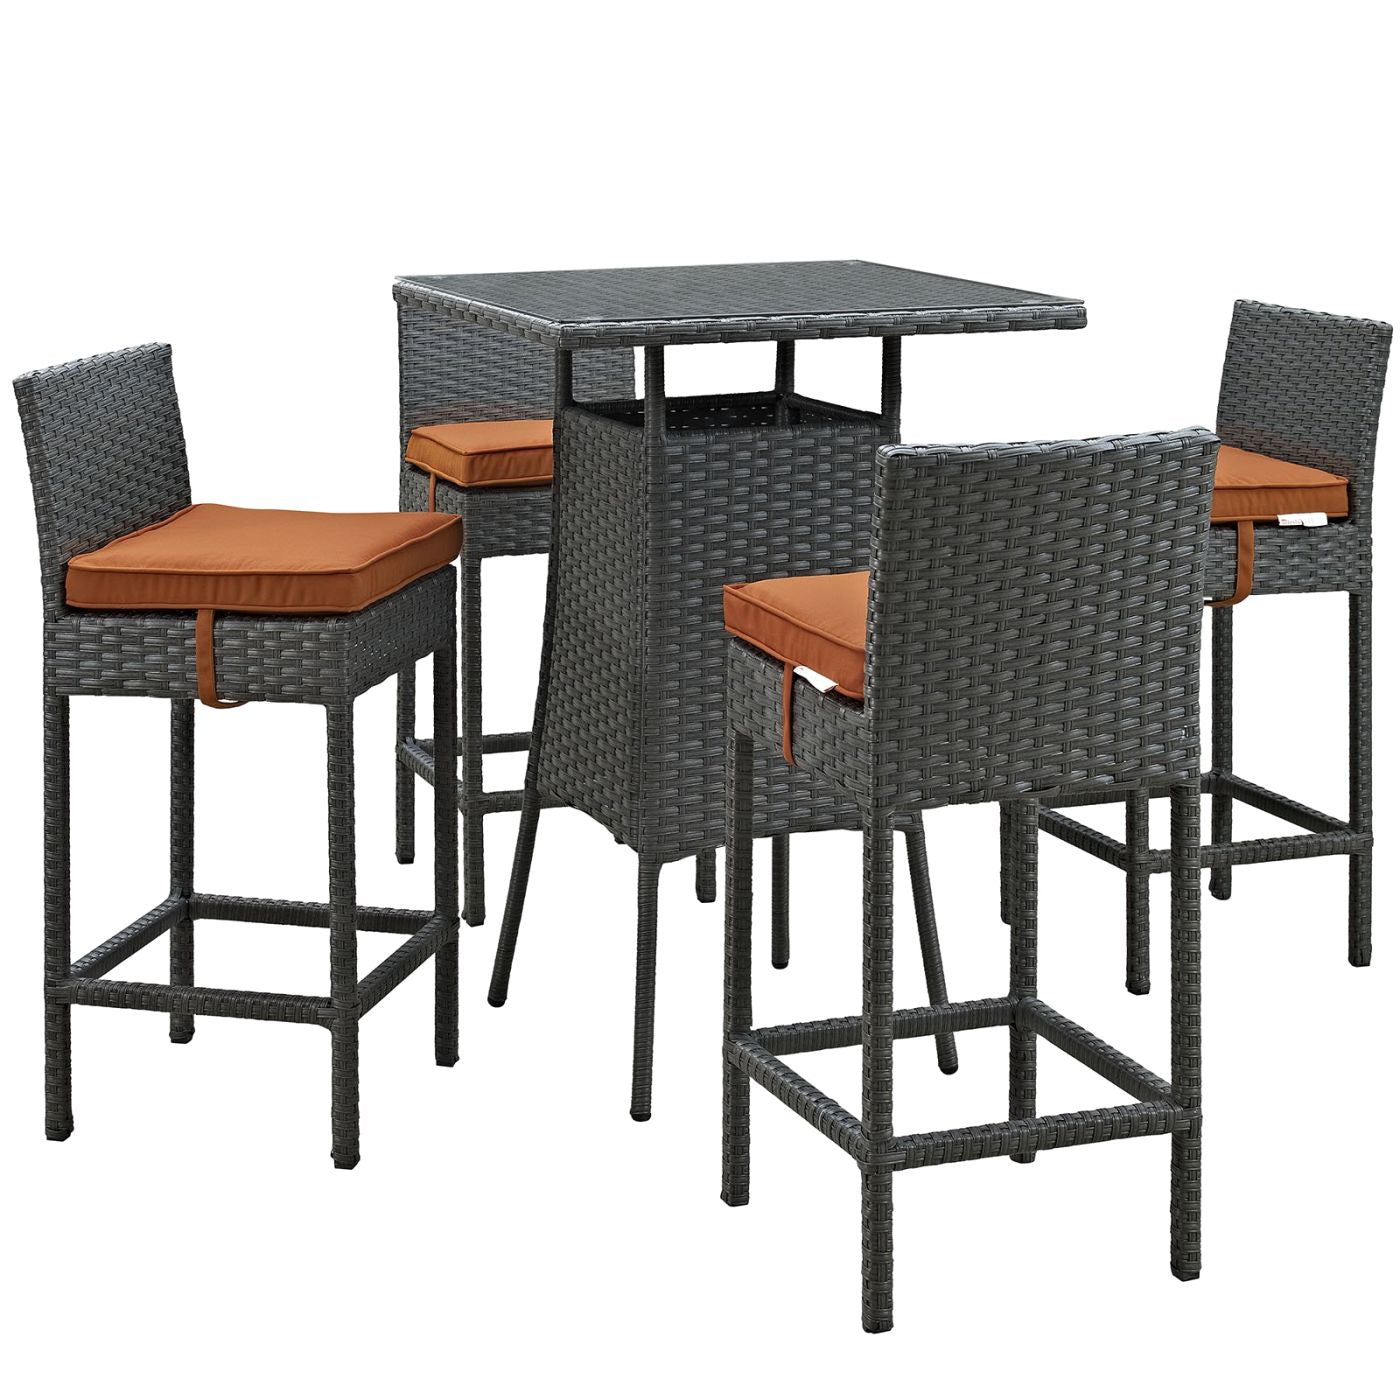 Outdoor Bar Tables For Sale - Home Art Decoration